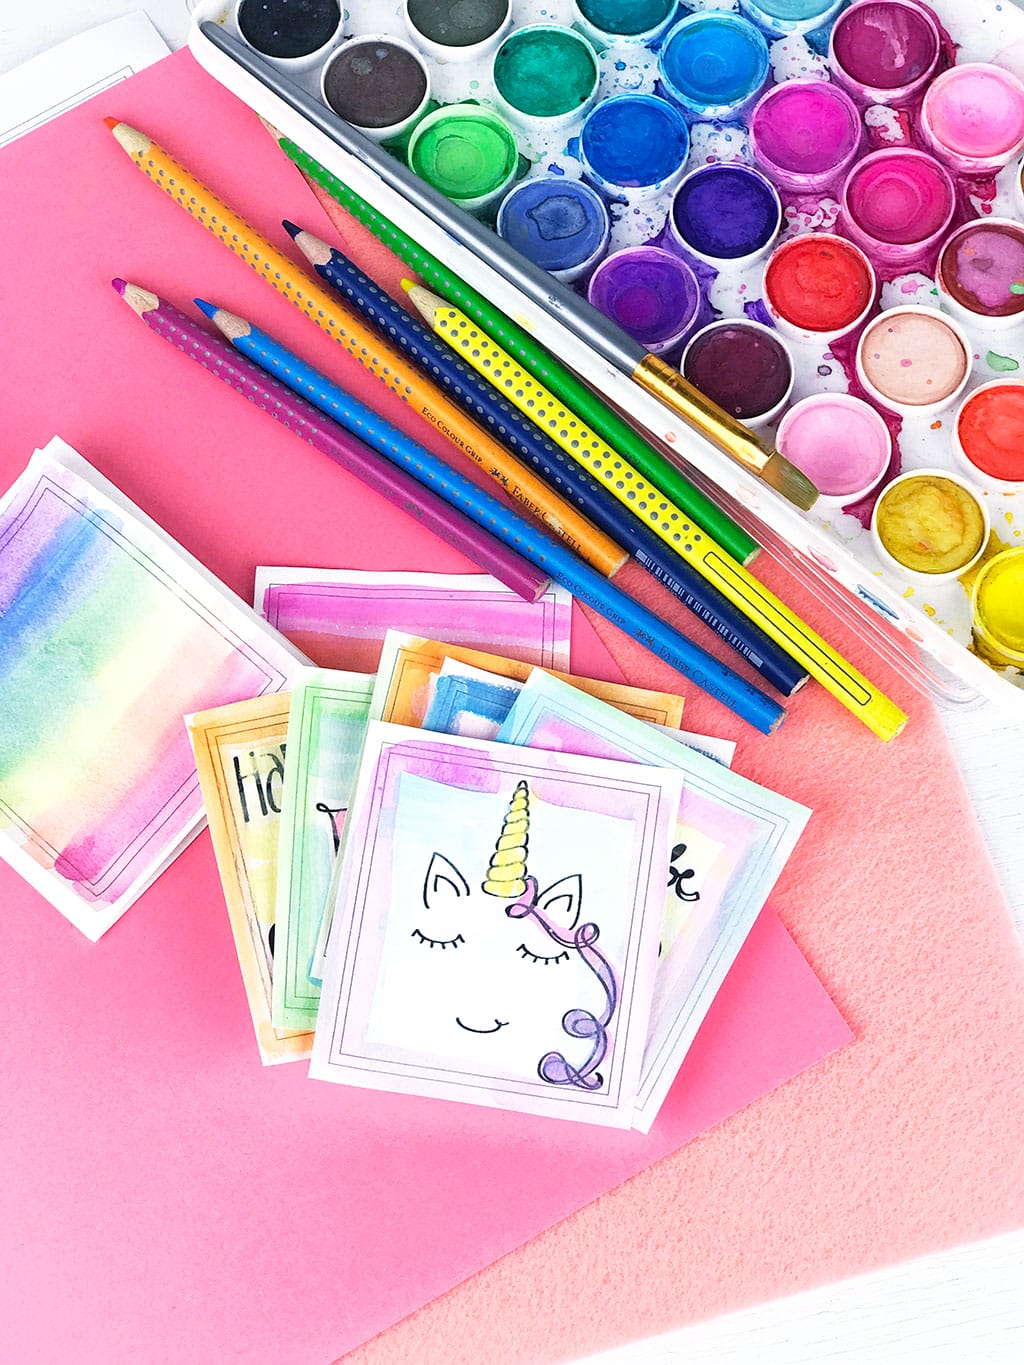 Learning About Color By Coloring | We can learn about colors by coloring. Make a coloring book that you can put together yourself and then color however you'd like. Play with the coloring supplies you use, blend colors or draw your own designs to color. #color #art #kids #activity